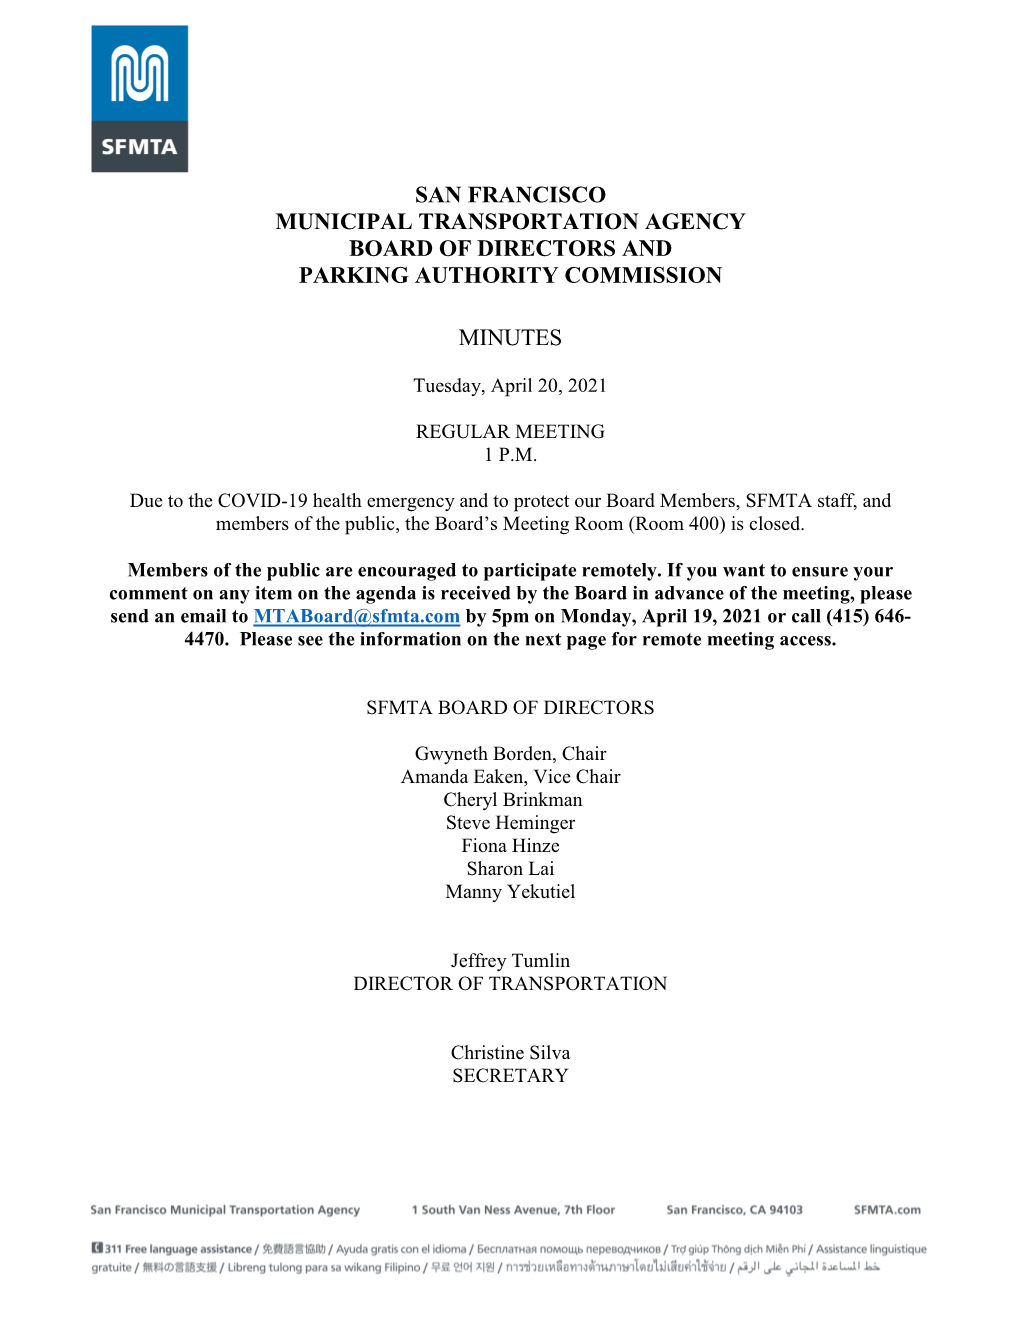 San Francisco Municipal Transportation Agency Board of Directors and Parking Authority Commission Minutes